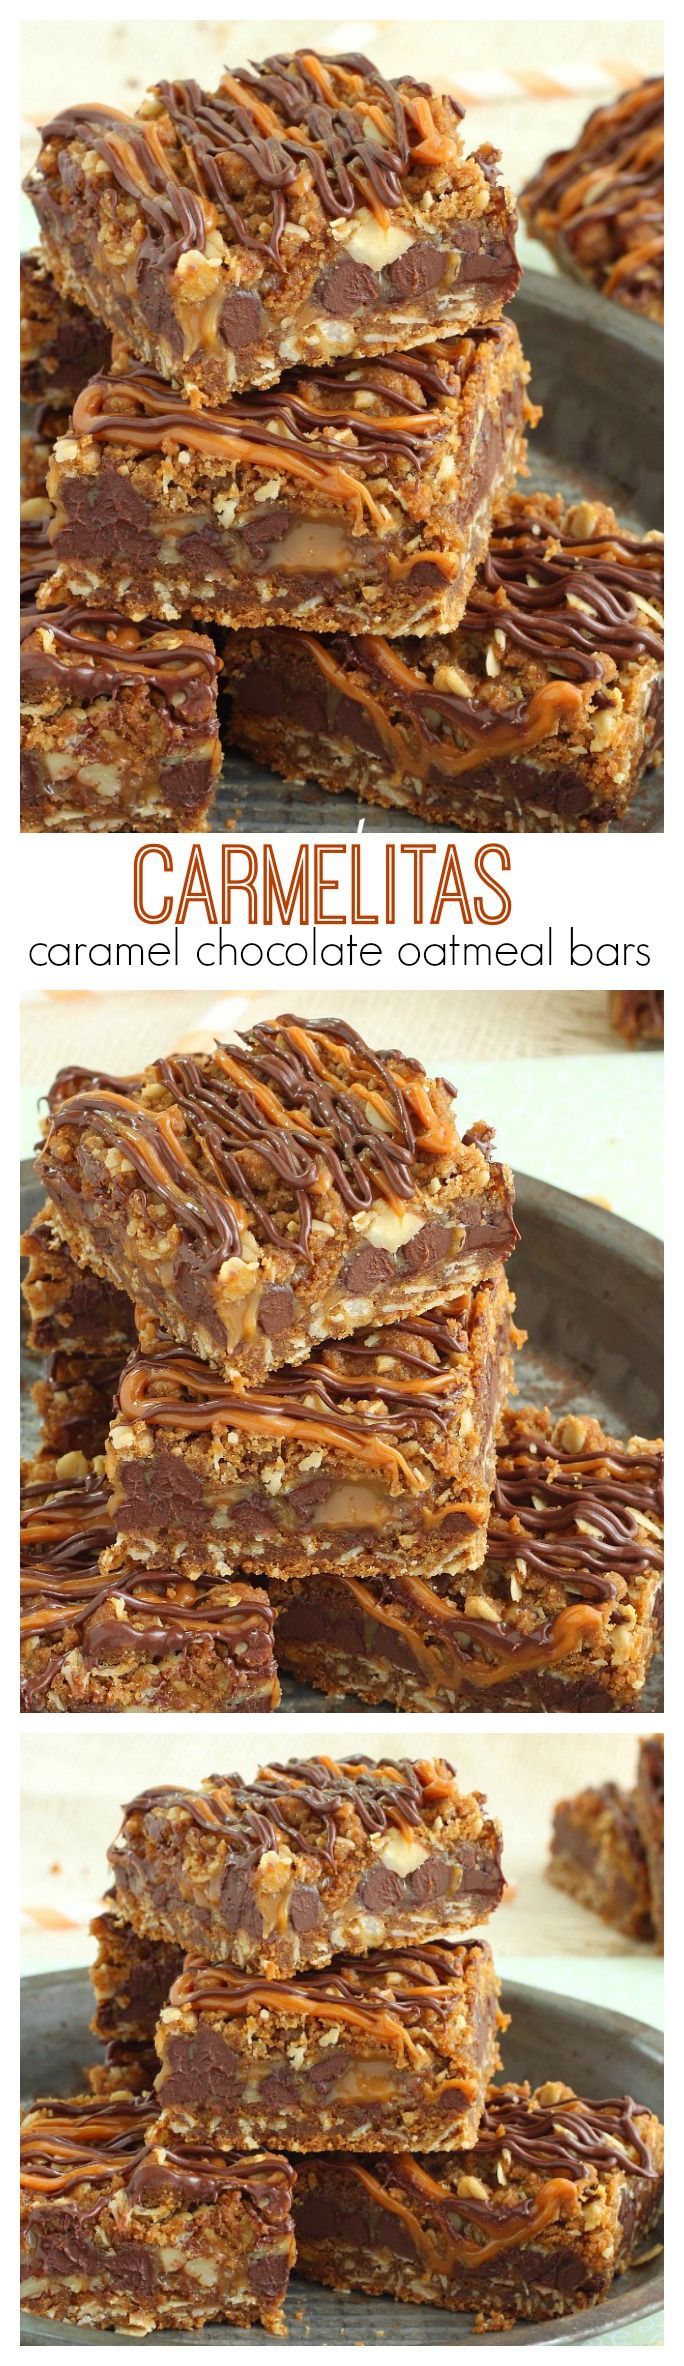 Easy to make oatmeal cookie bars filled with gooey caramel and oozing chocolate, t